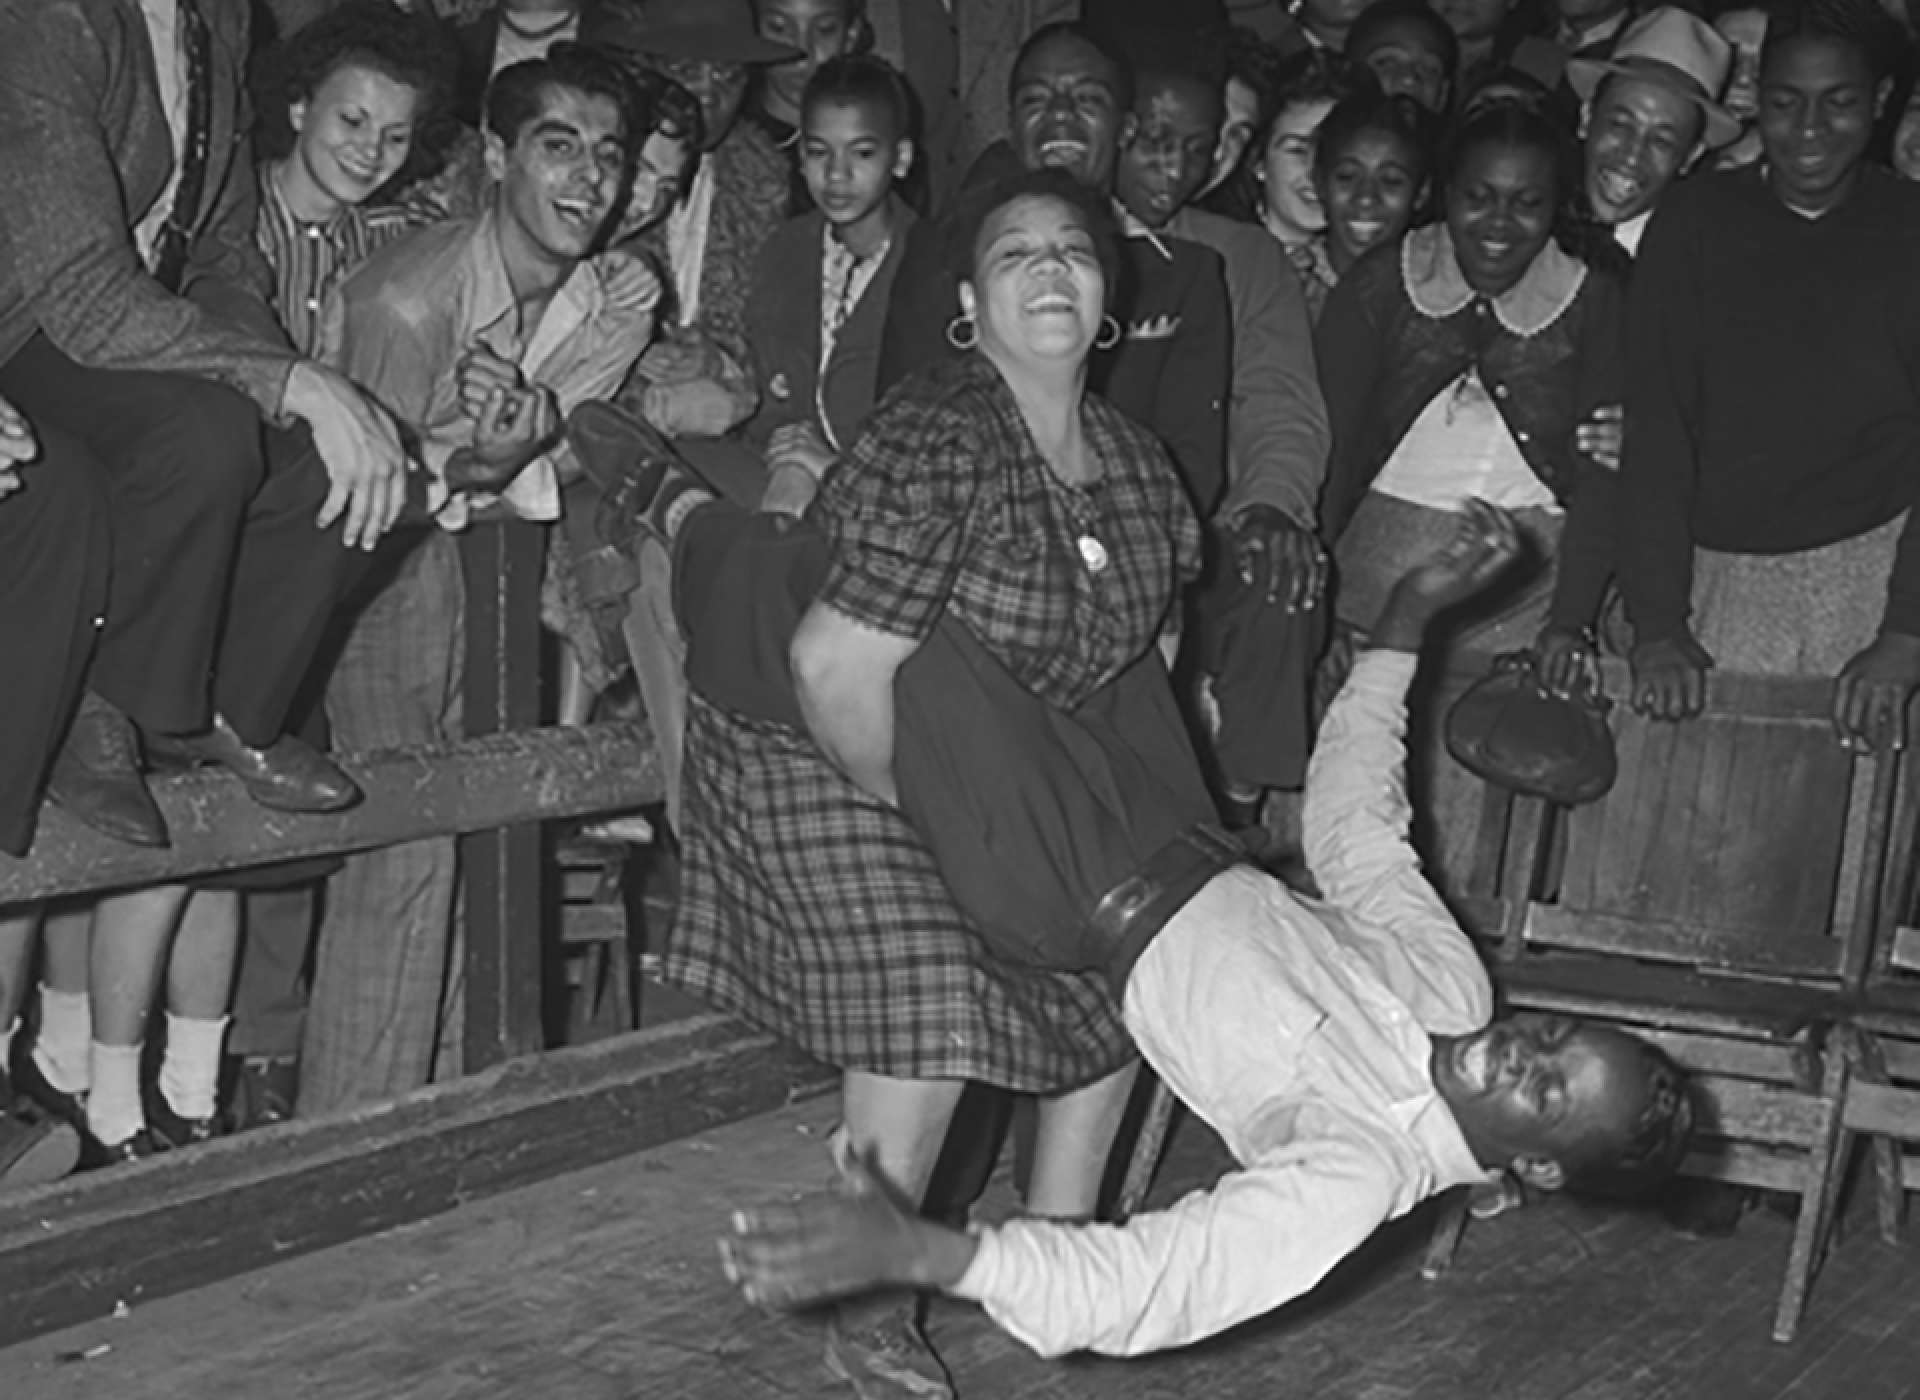 A couple dancing in a nightclub. Credit: Los Angeles Times from Wikicommons.